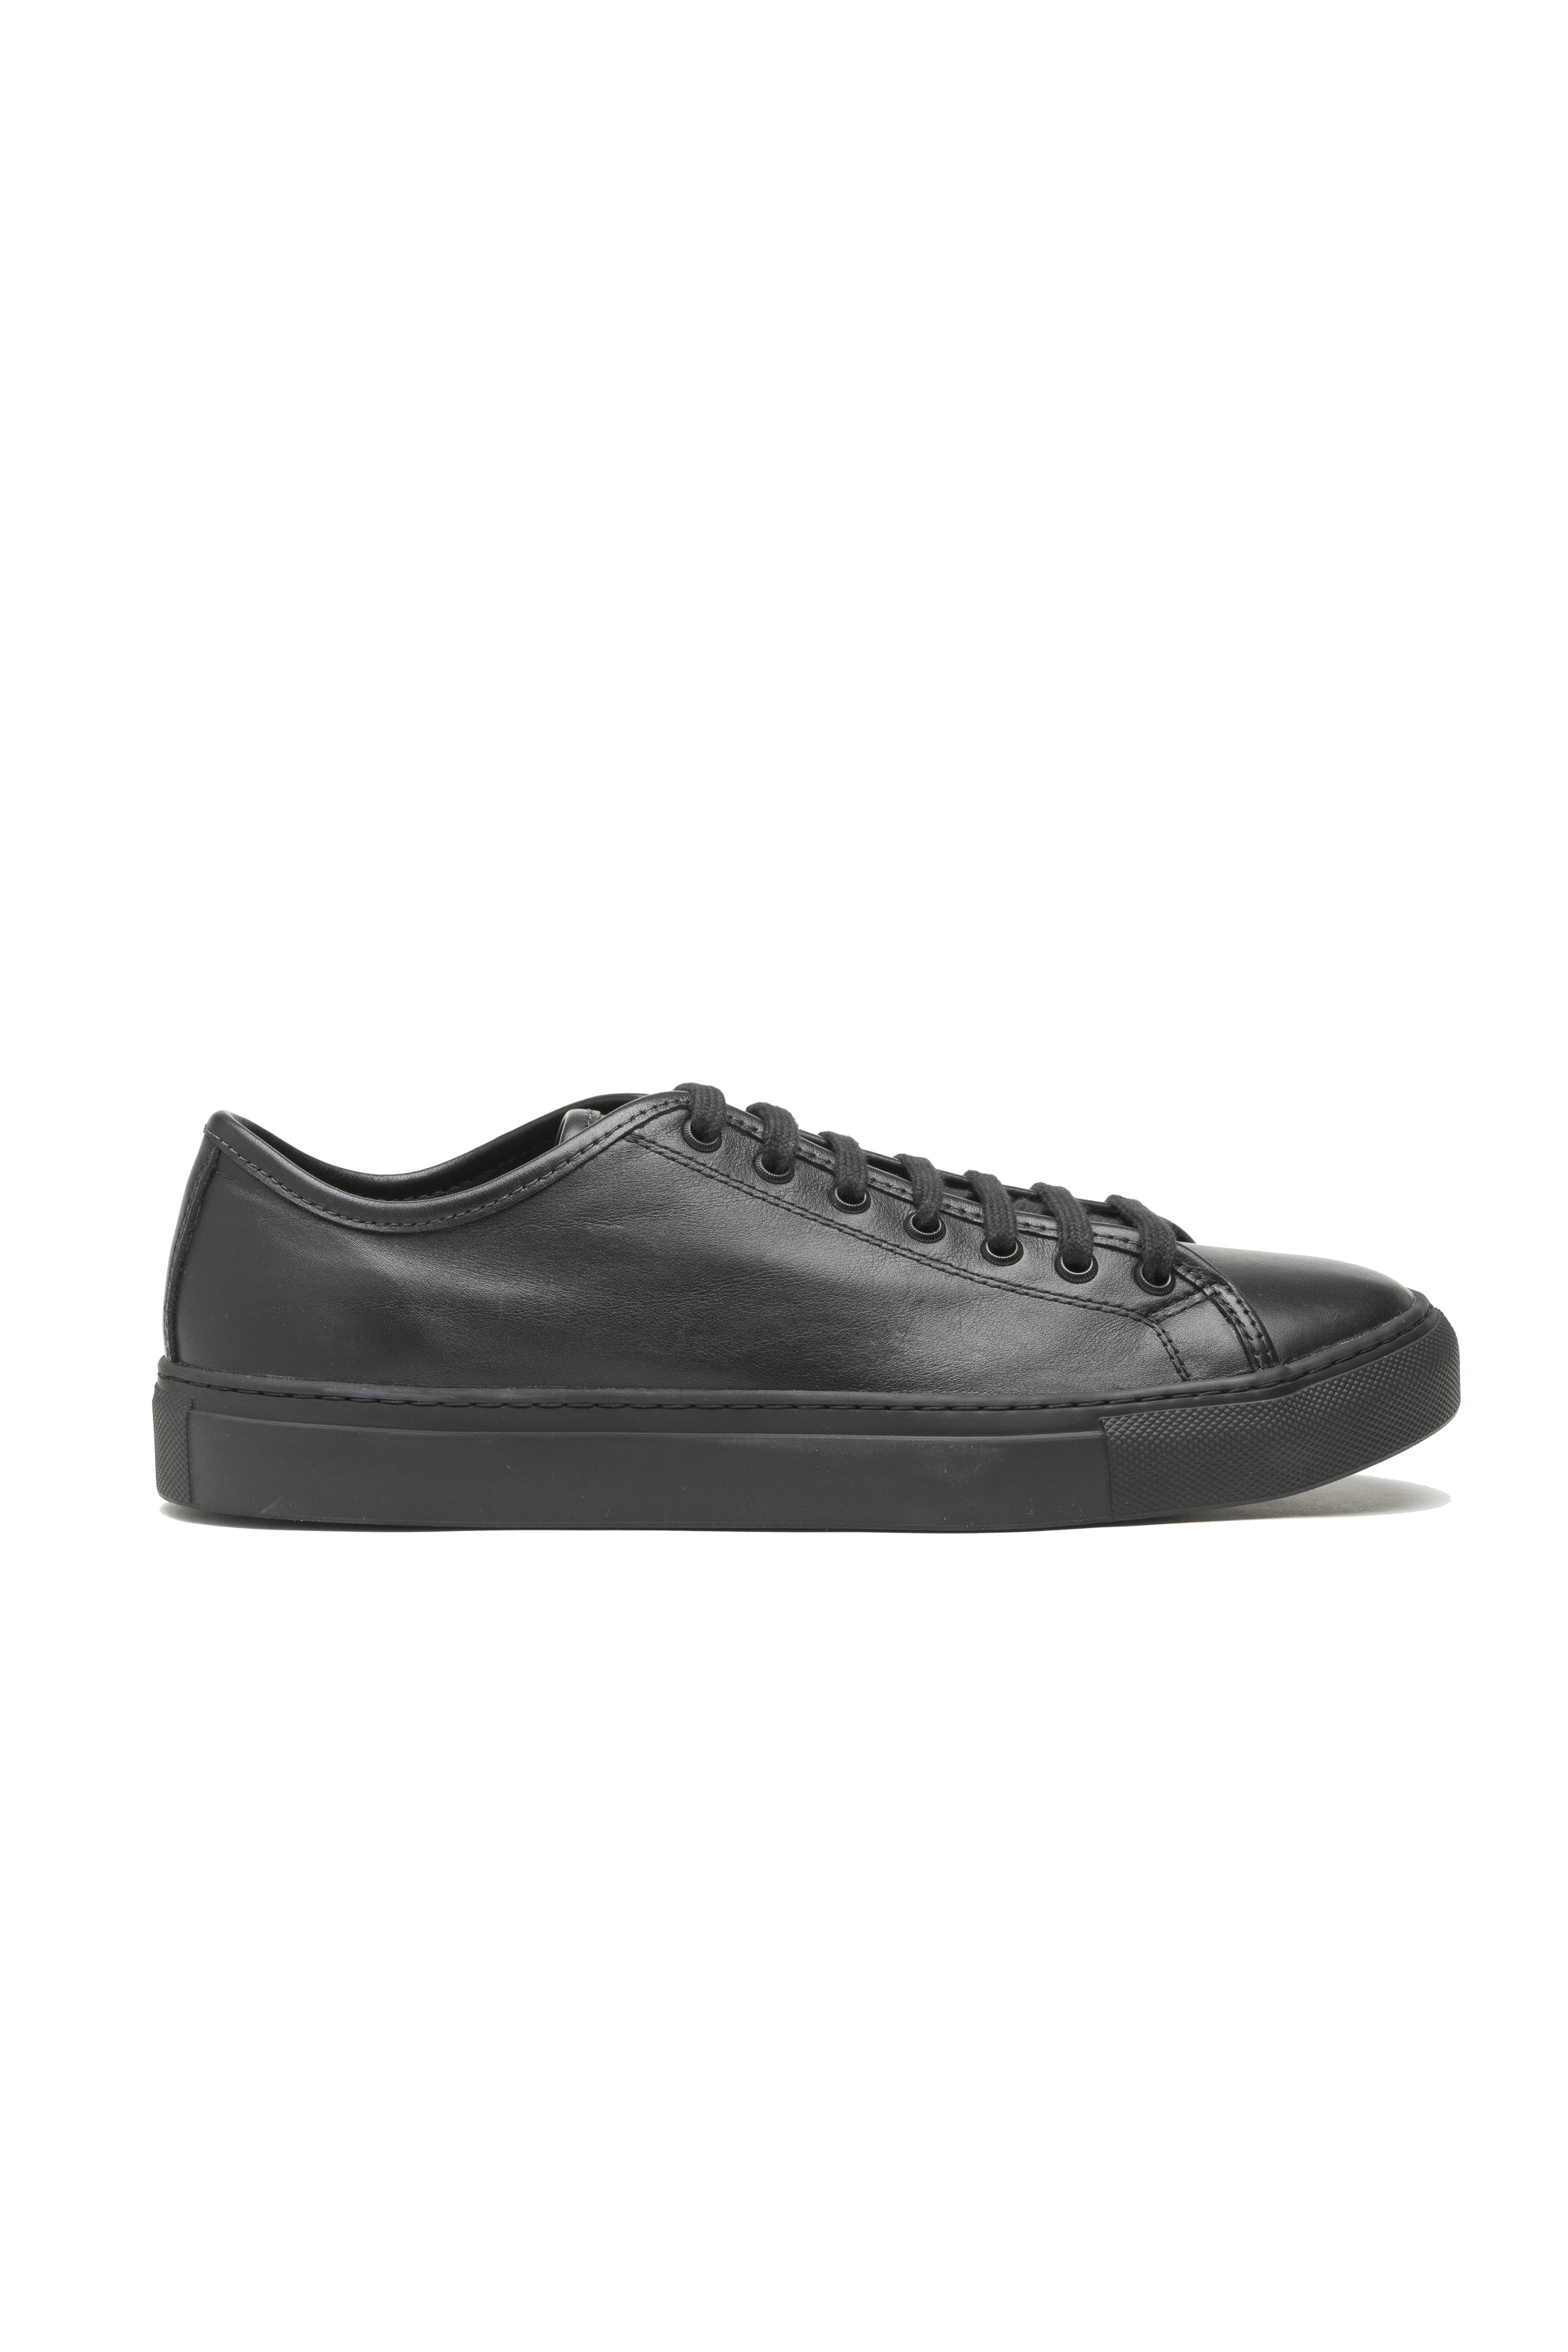 SBU 04207_2023SS Classic lace up sneakers in black calf-skin leather 01